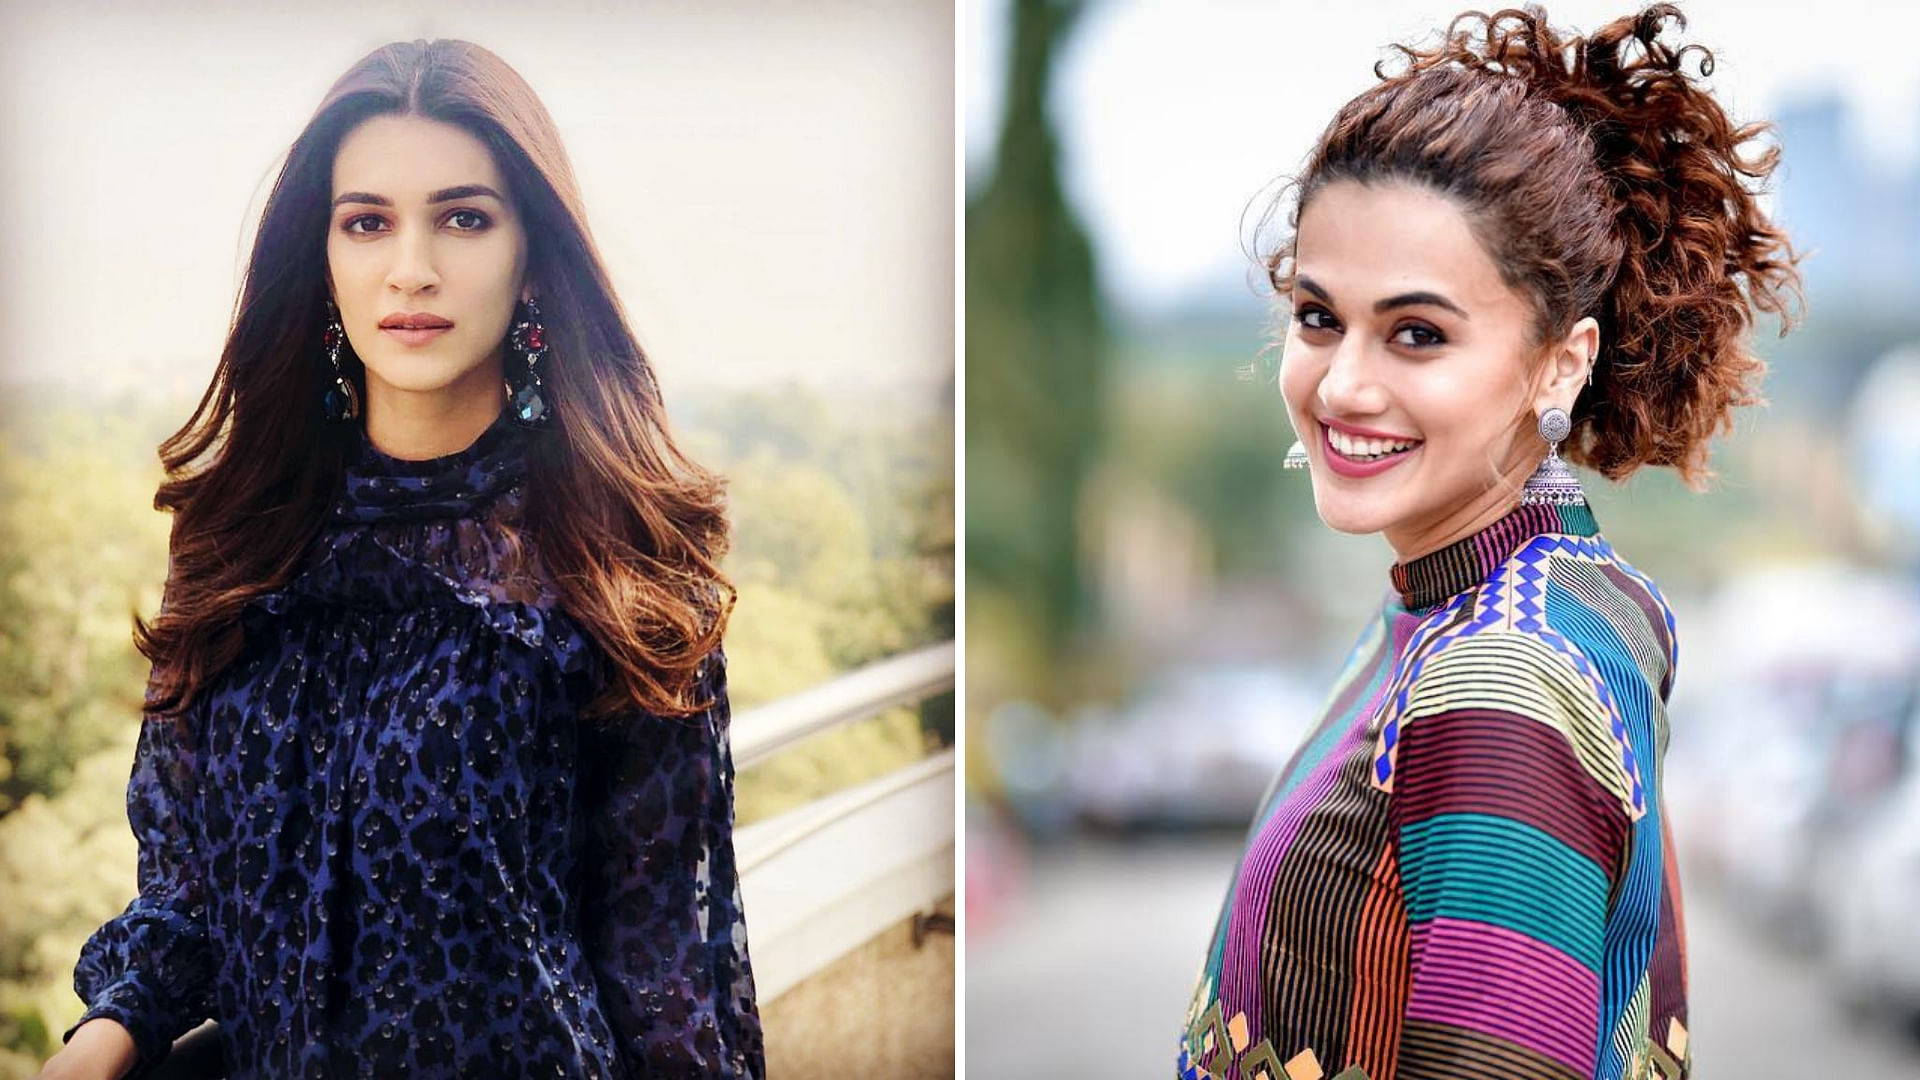 Taapsee Pannu and Kriti Sanon are publically contributing to the ongoing debate about gender pay gap in Bollywood.